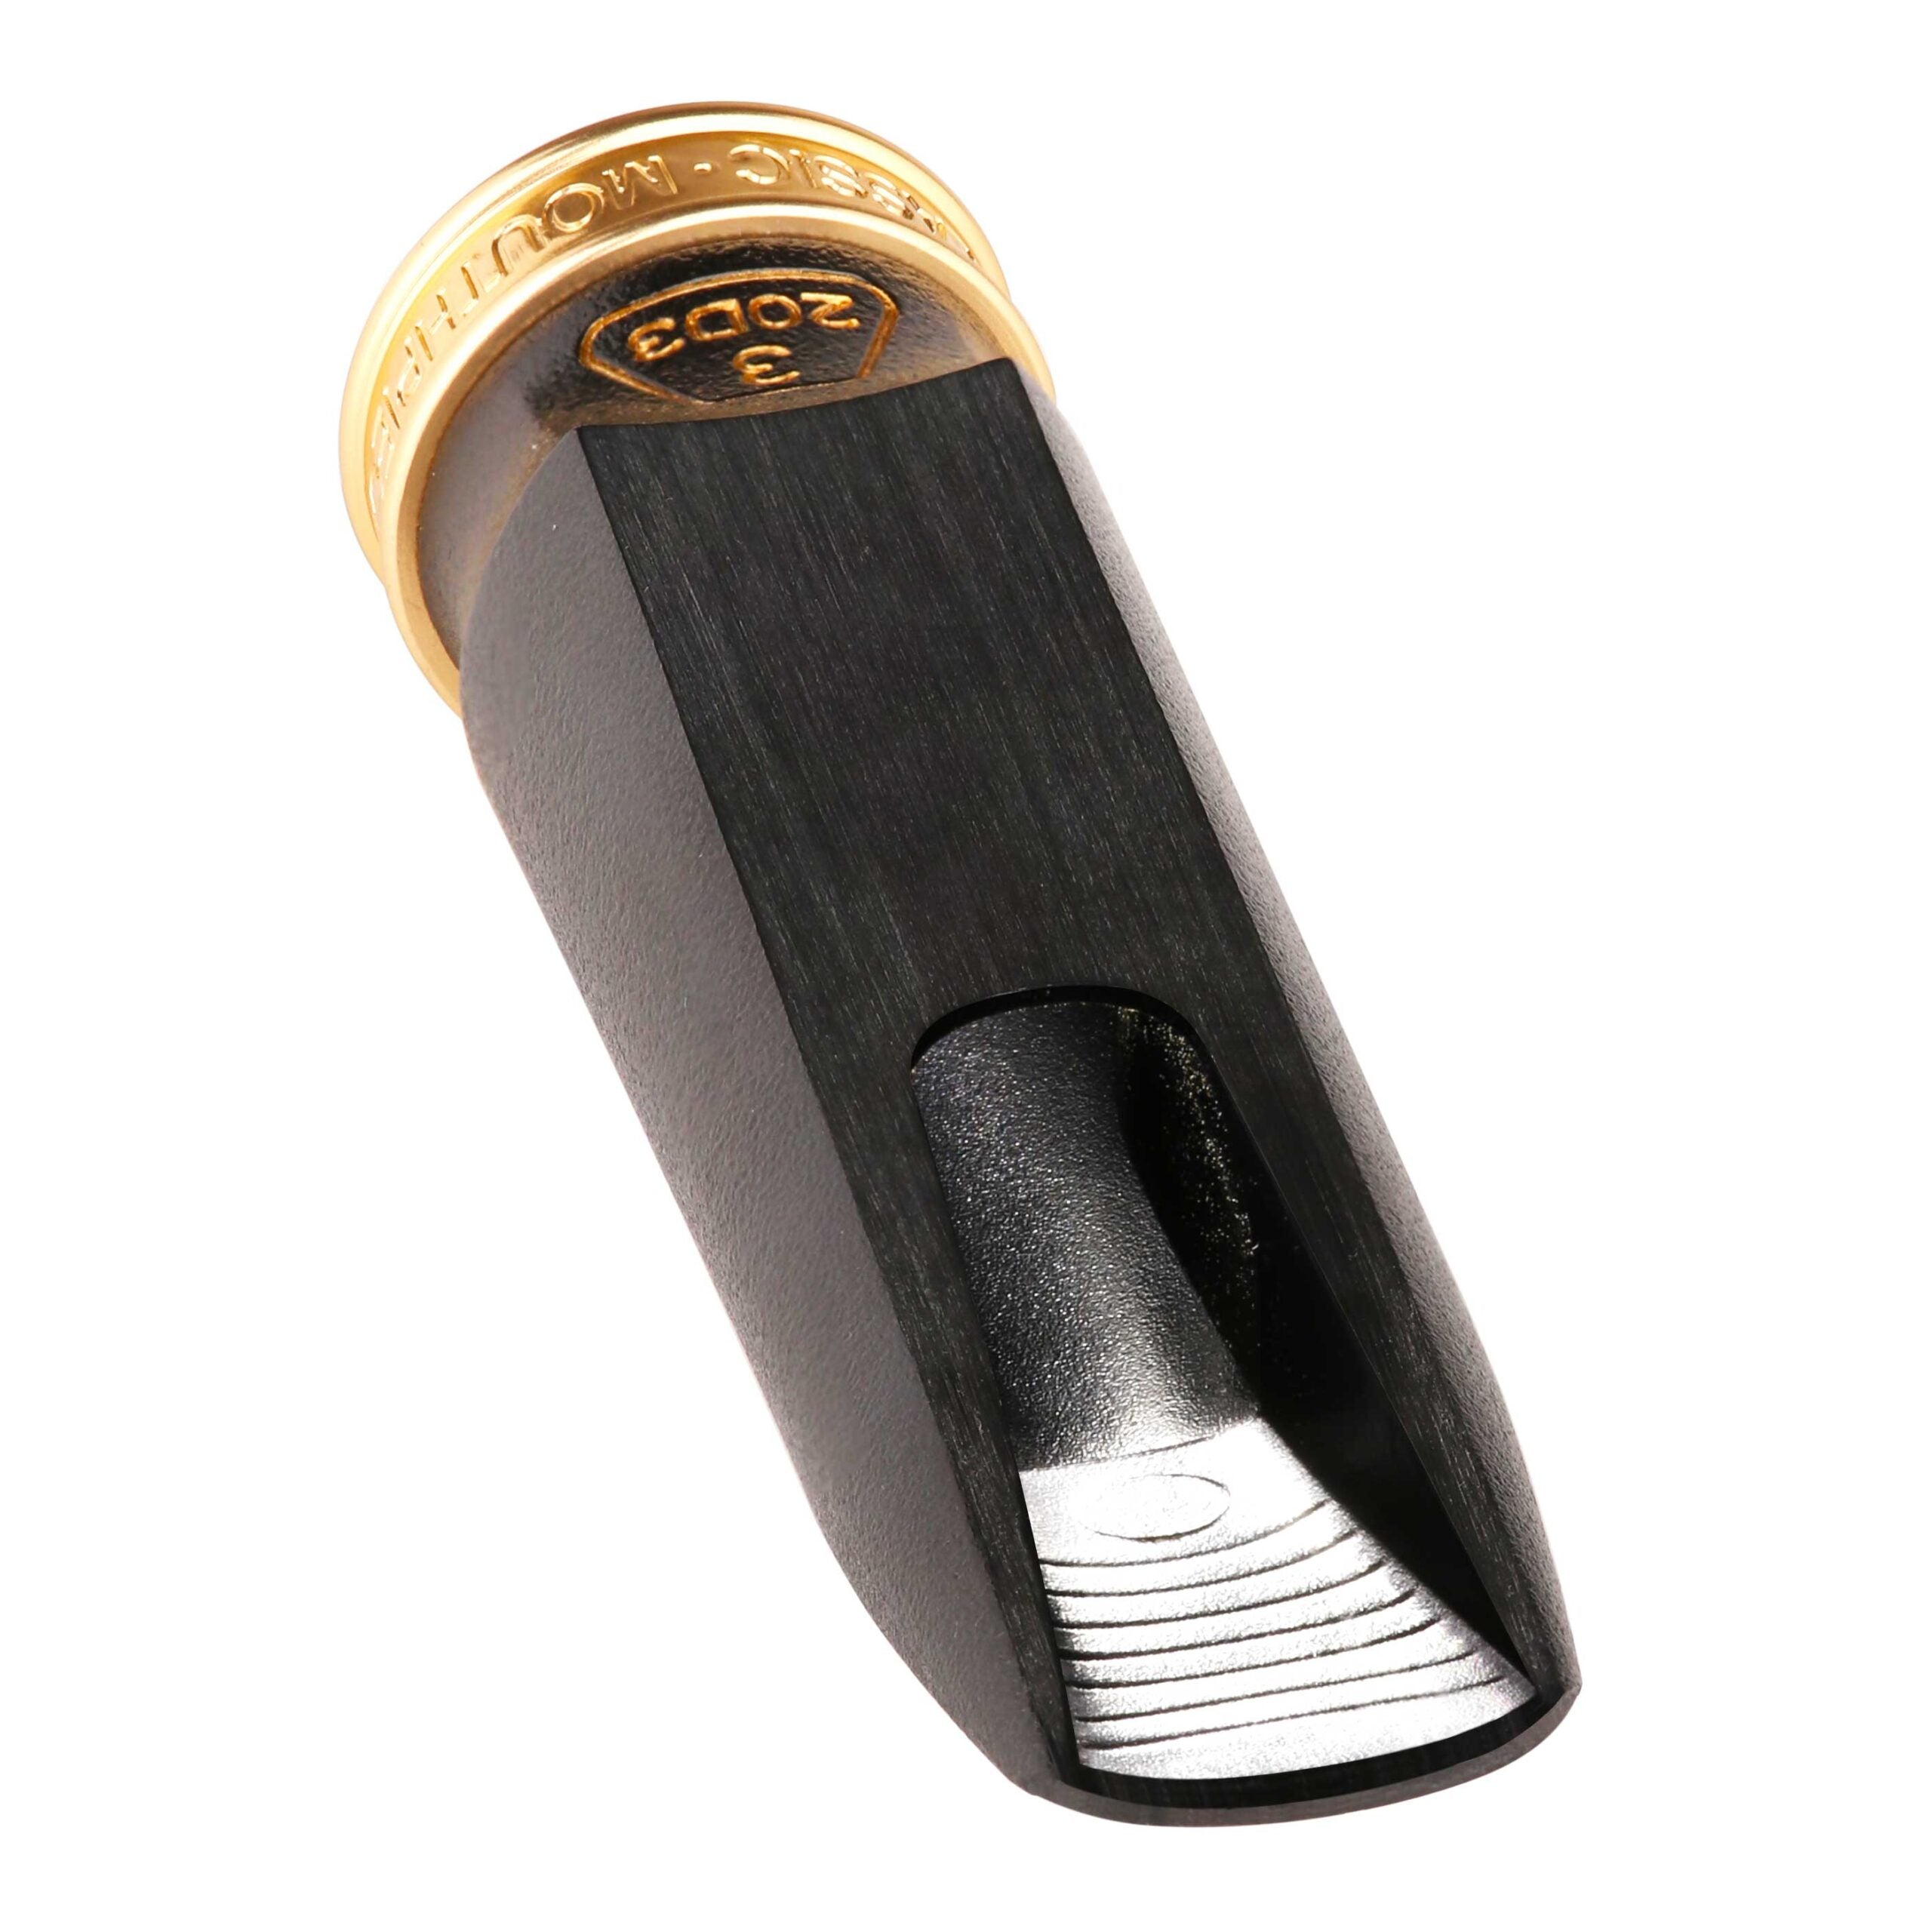 Theo Wanne WATER Bb Alto Saxophone Rubber Mouthpiece